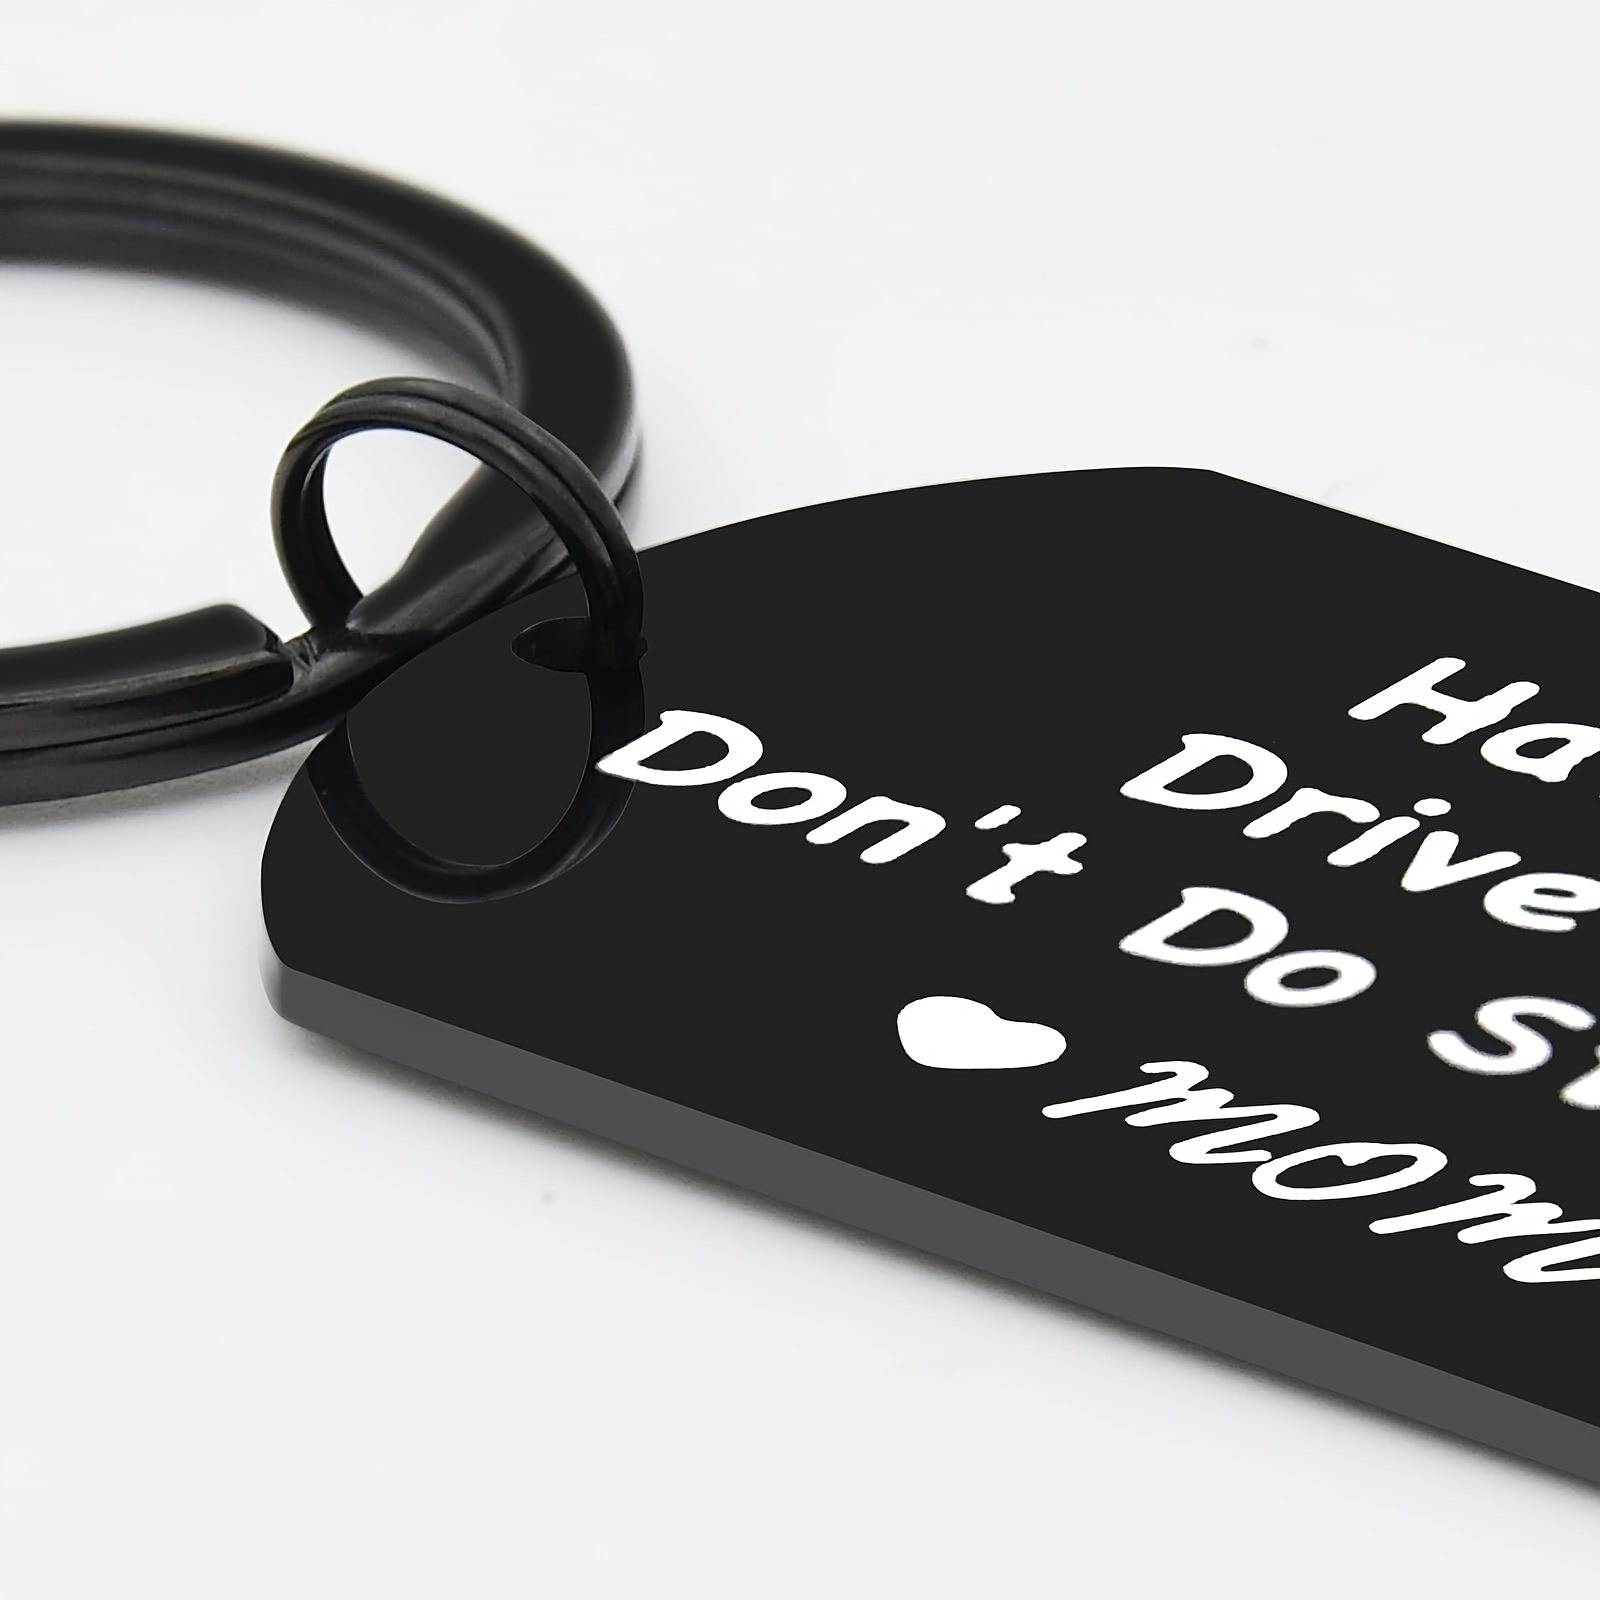 1pc women Silver Stainless Steel Keychain: Don't Do Stupid Love Mom Dad,  Funny Gift , Sweet Sixteen Gift, Son Daughter Teenagers Gift, Drivers  License Gift For Son mom gifts for Kids' Graduation.